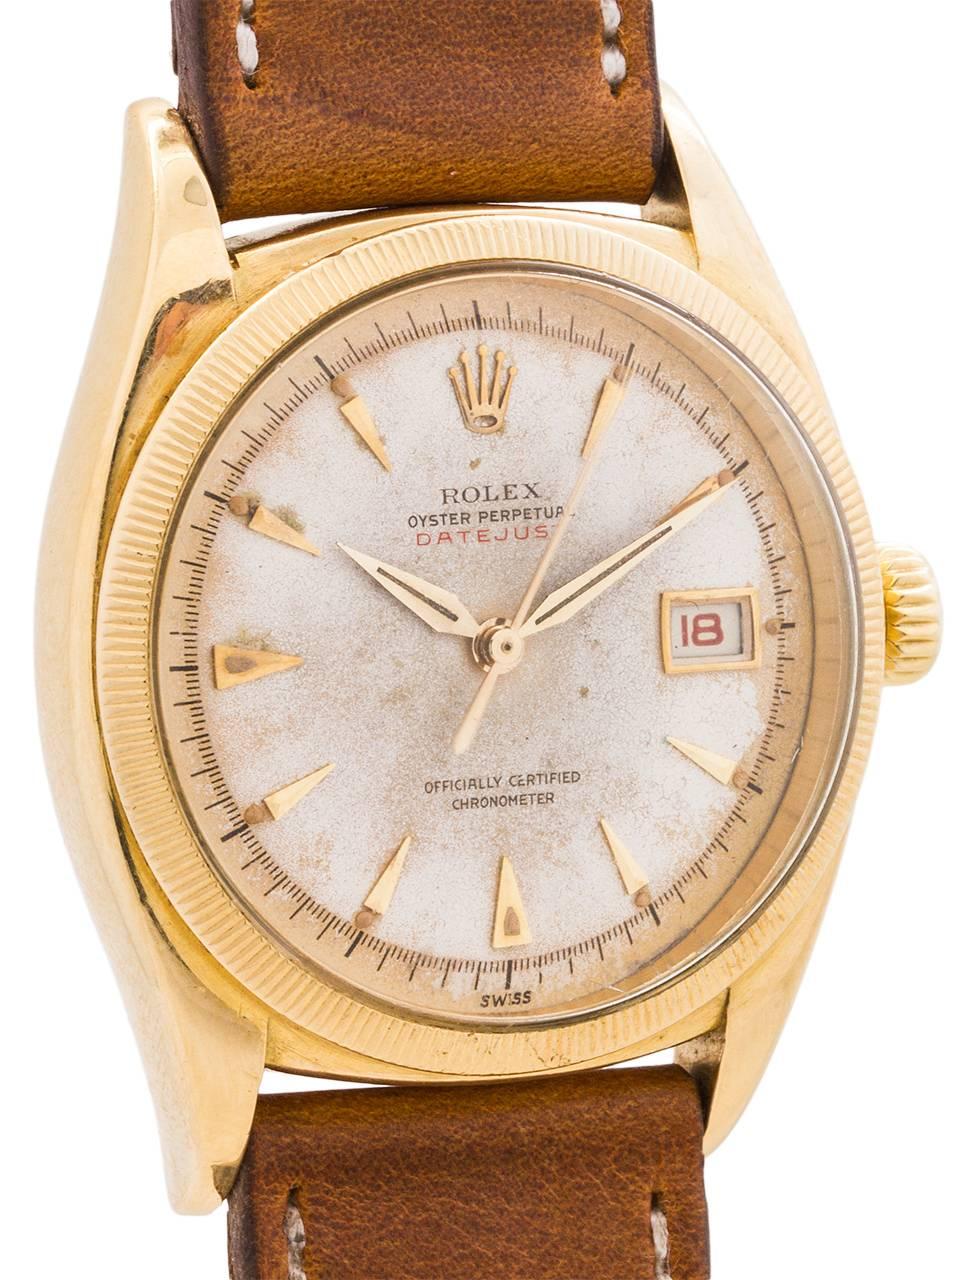 
An early, rare, and fine condition Rolex “Ovetone” Datejust model ref 6305 serial # 971,xxx circa 1954 with original  dial with red printed “Datejust” and red print date wheel. Featuring 36mm diameter 18K yellow gold case with finely milled bezel,